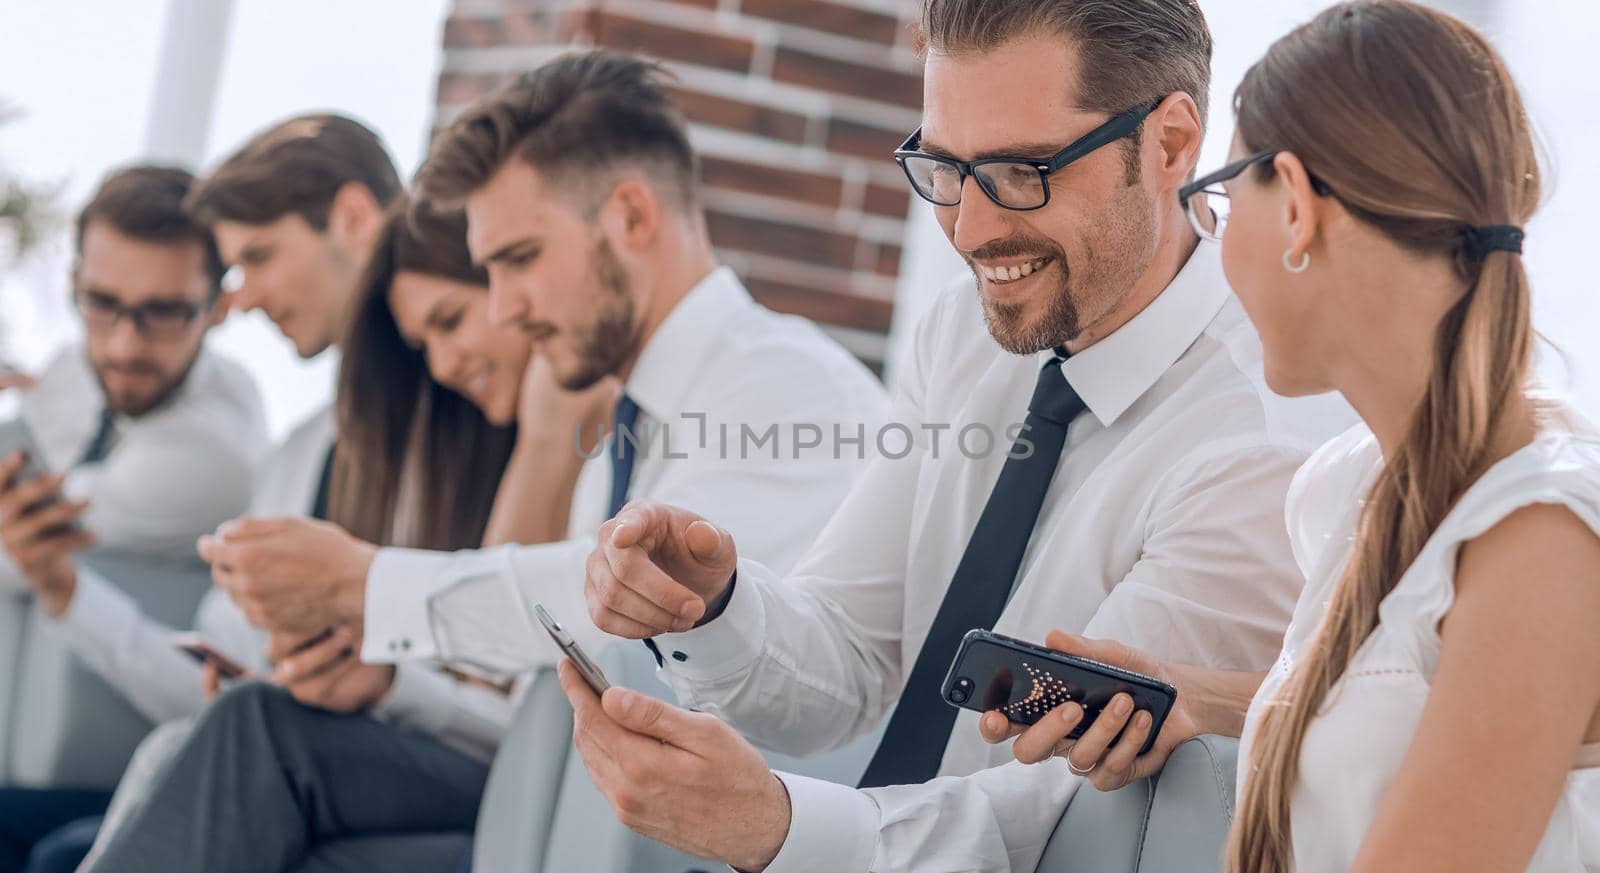 employees of the company using their smartphones sitting in the office lobby.people and technology